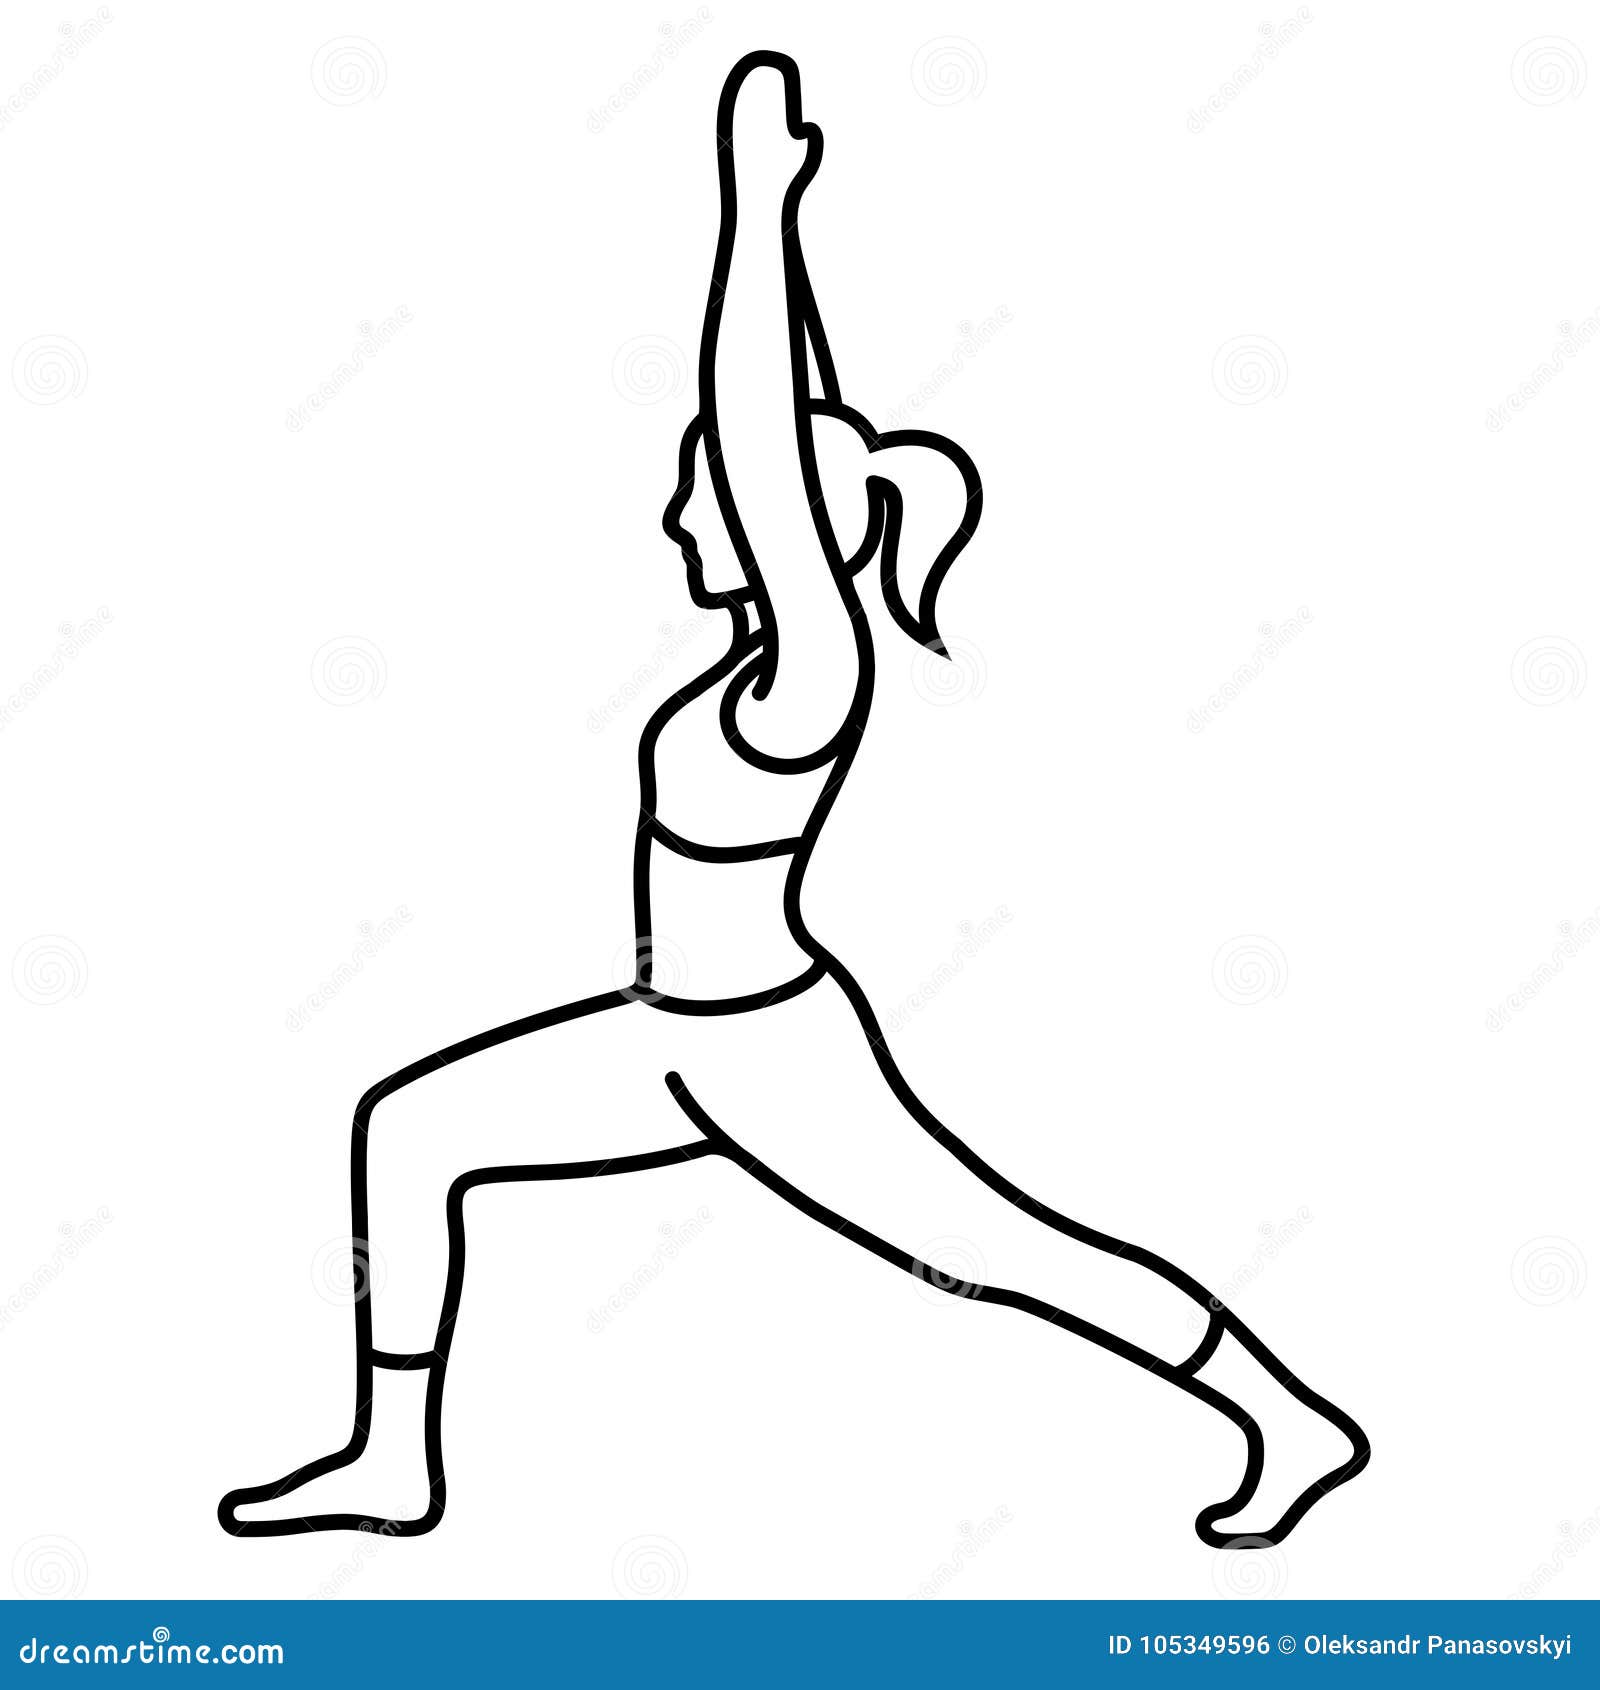 Wheel pose yoga workout outline healthy lifestyle Vector Image